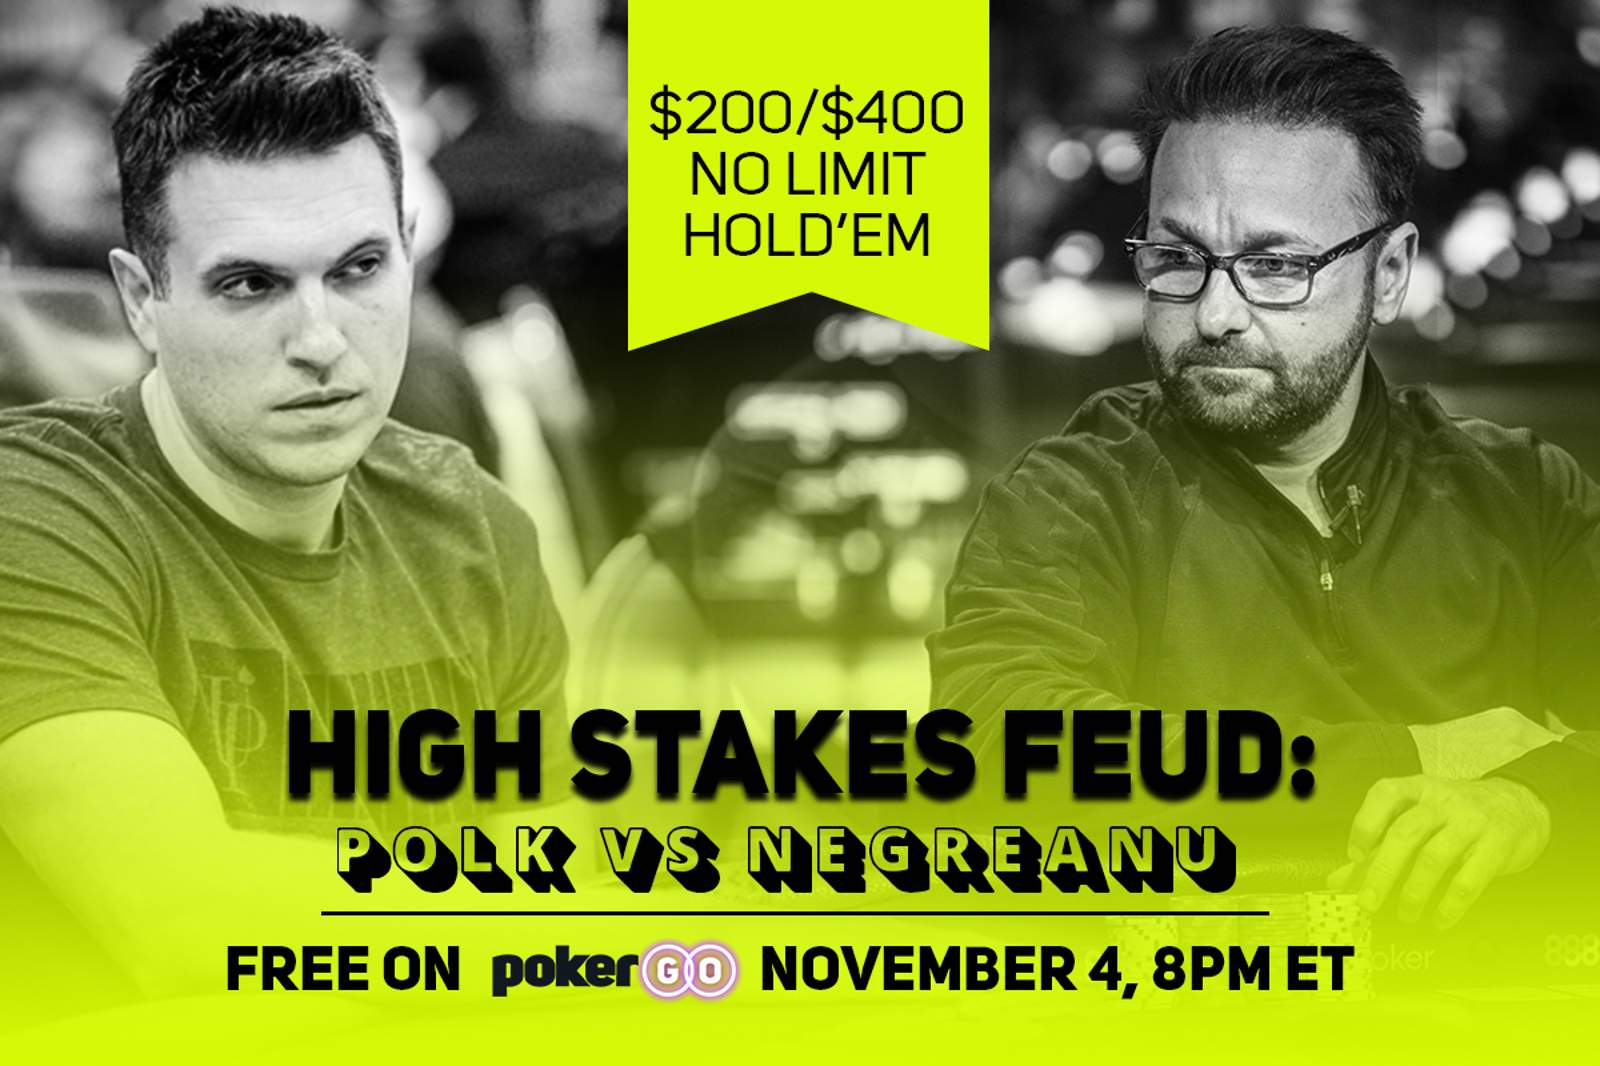 Daniel Negreanu and Doug Polk Face-Off on High Stakes Feud!